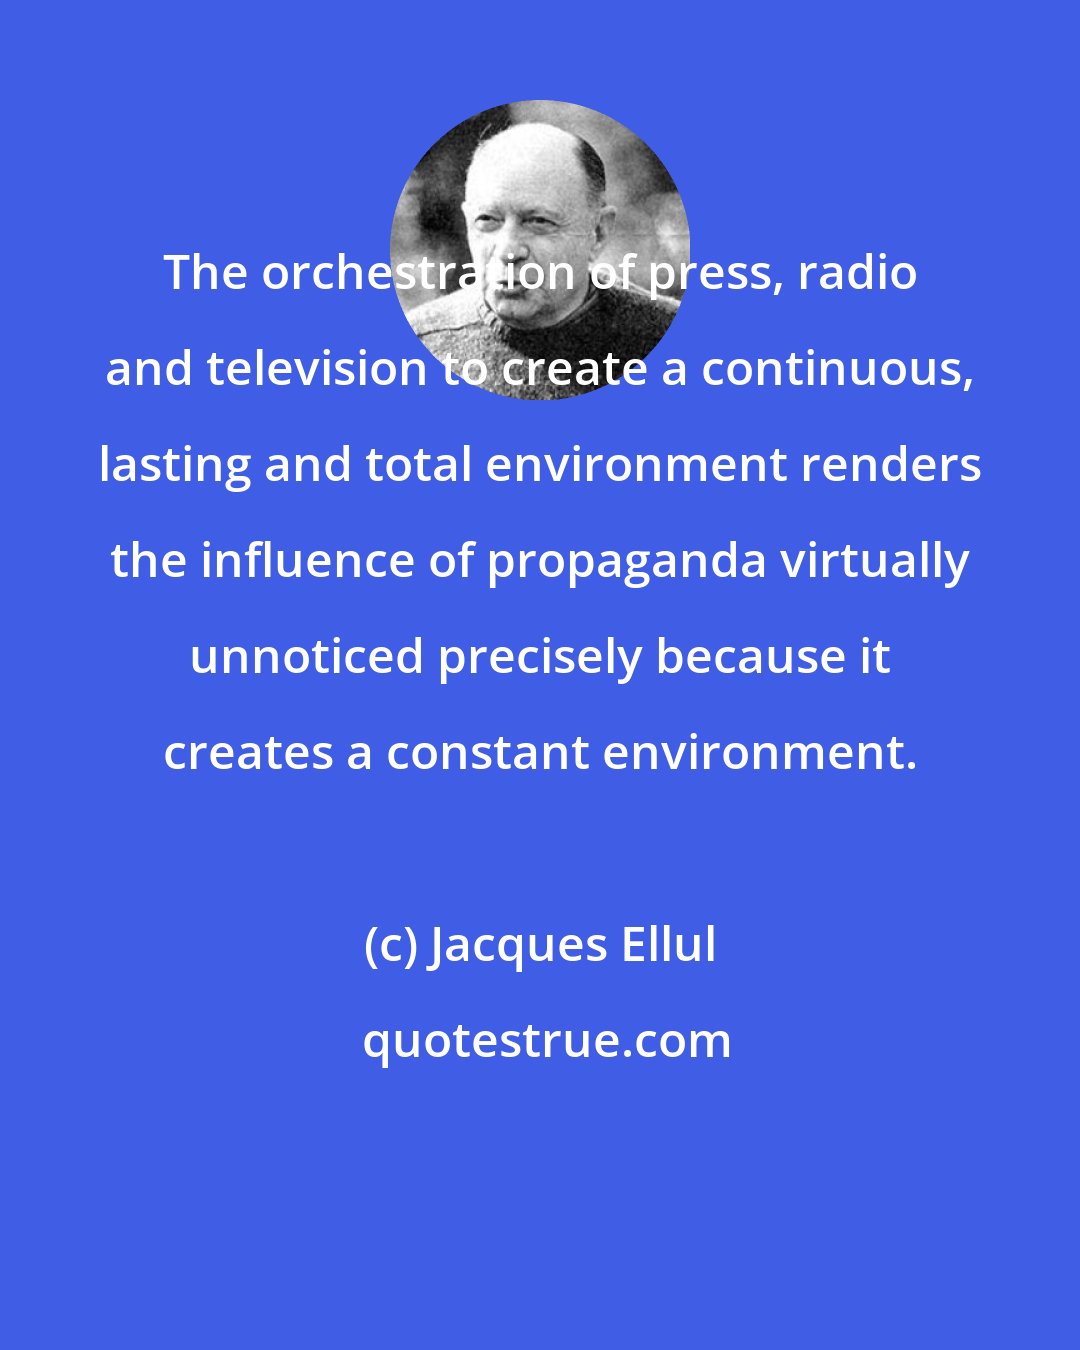 Jacques Ellul: The orchestration of press, radio and television to create a continuous, lasting and total environment renders the influence of propaganda virtually unnoticed precisely because it creates a constant environment.